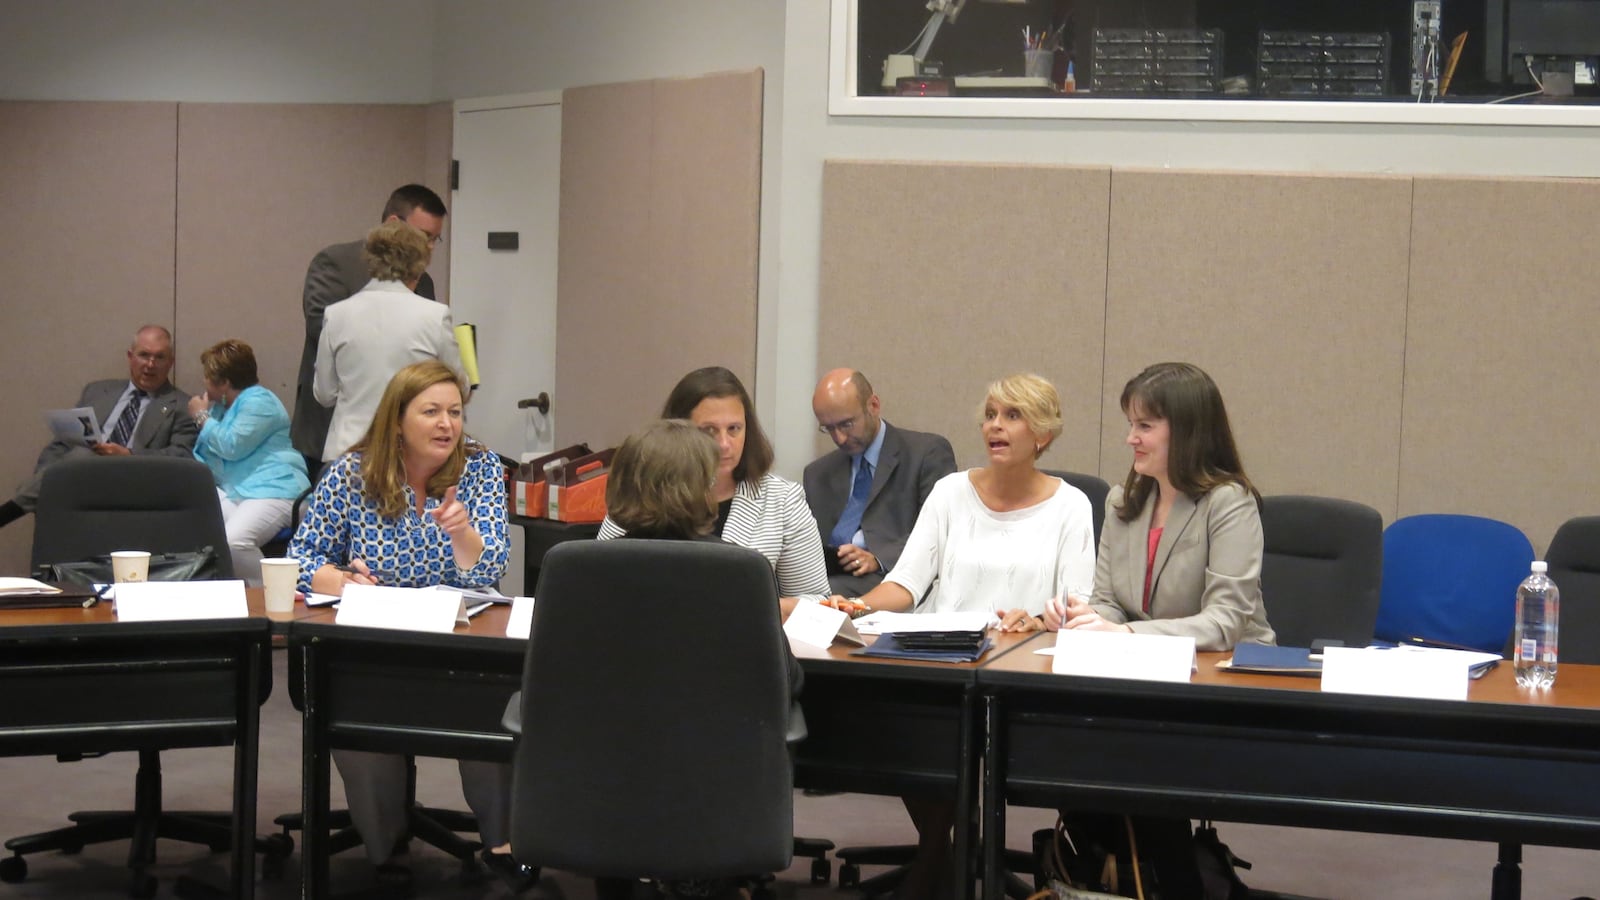 Education Commissioner Candice McQueen (right) discusses assessments during a task force meeting.